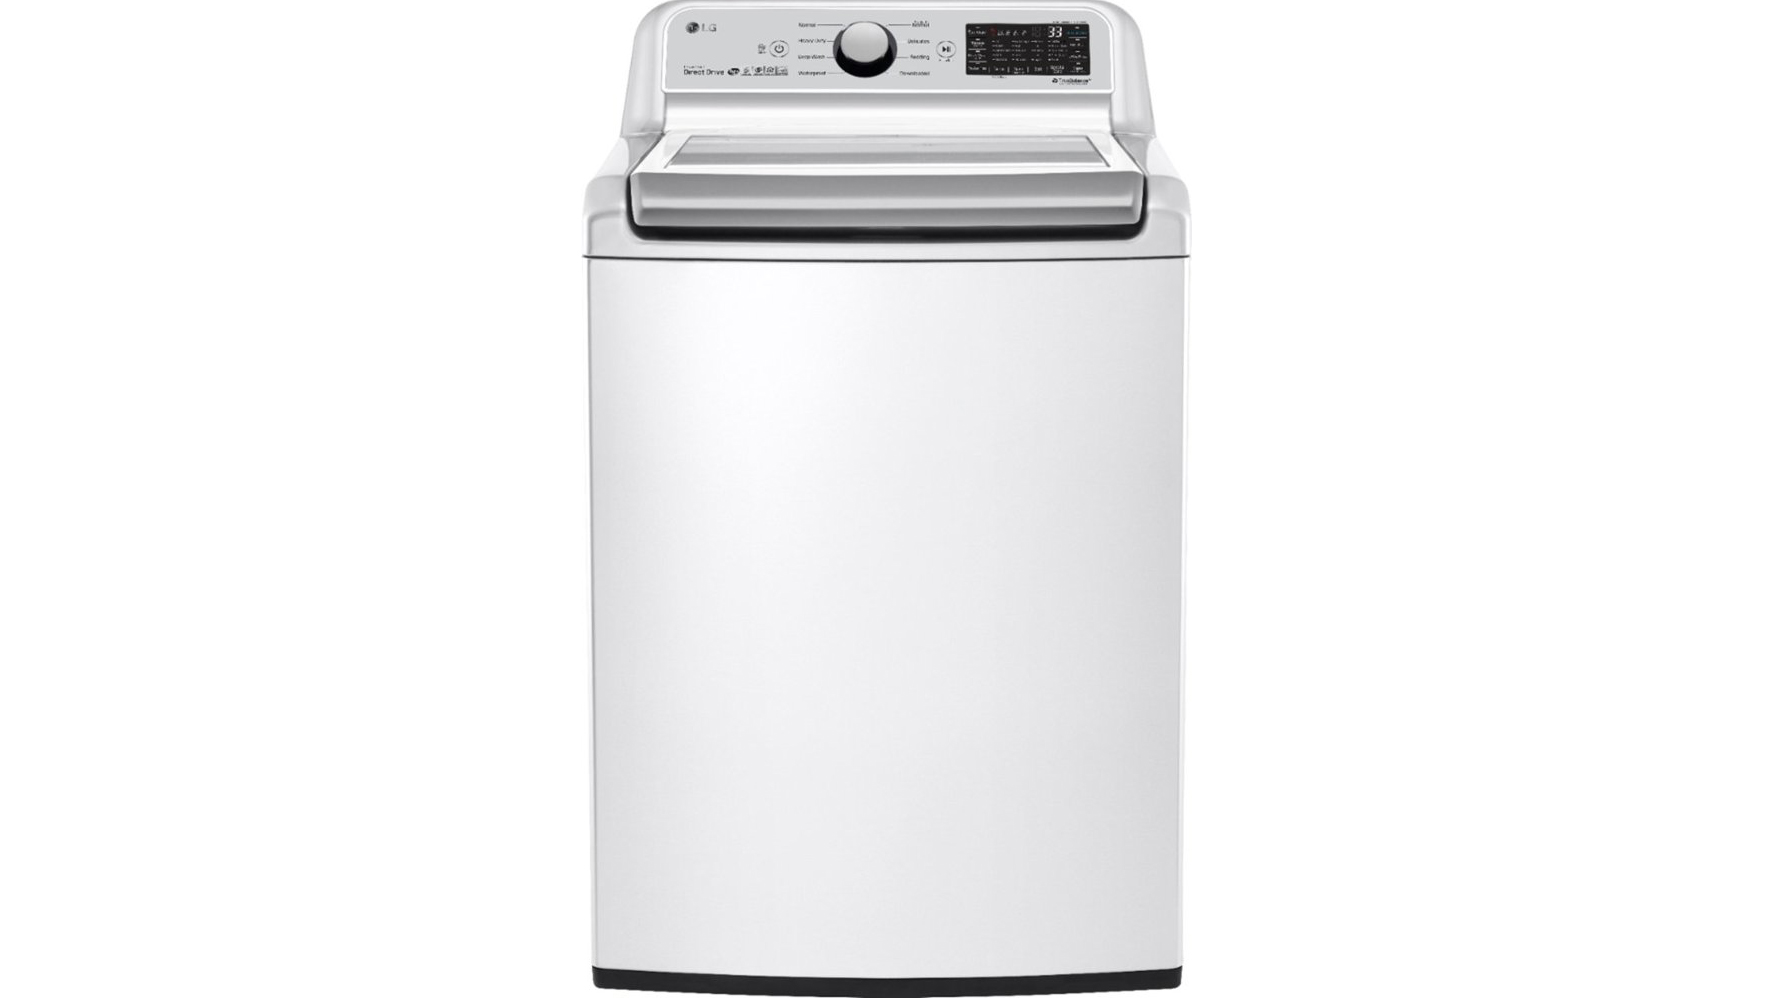 Best top load washers: LG Smart Top Load Washer WT7300CW